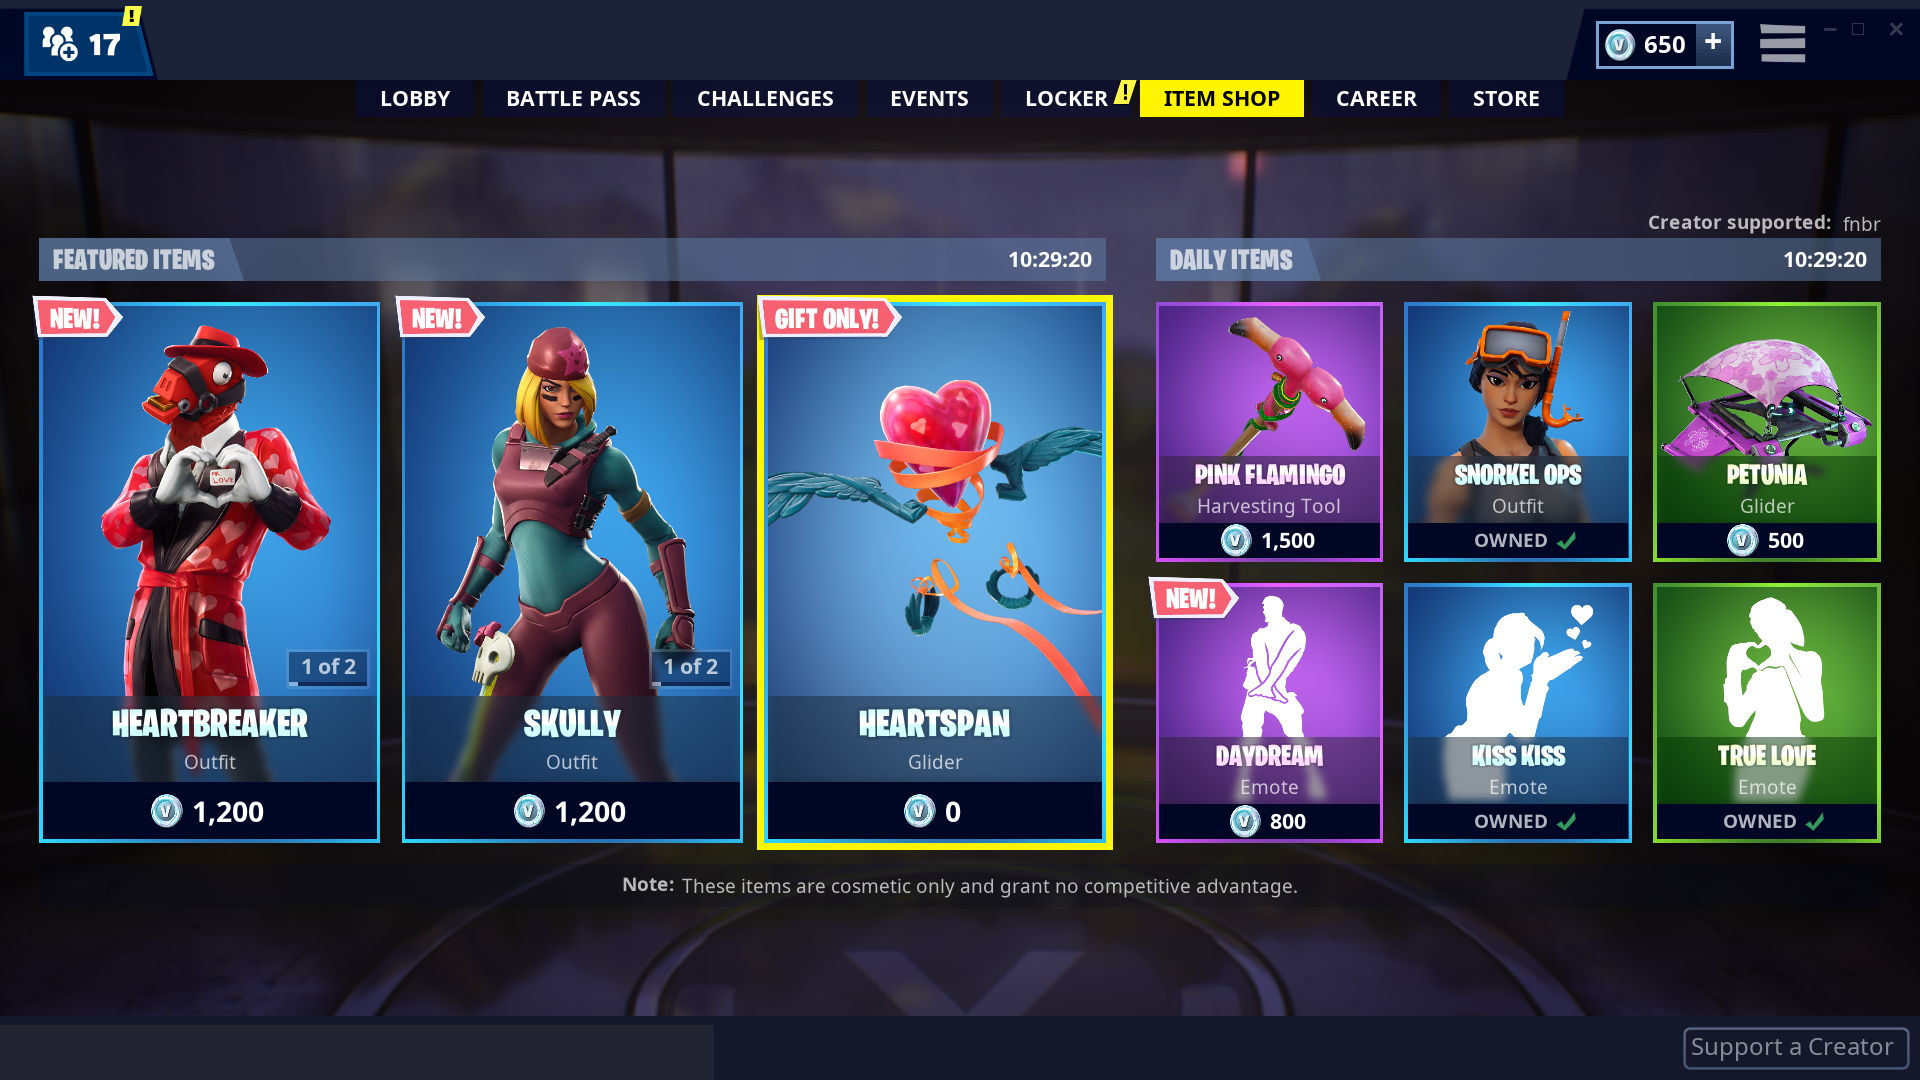 Fortnite How To Get The Free Heartspan Glider And Cuddle Hearts - head to the item shop tab and select the heartspan panel